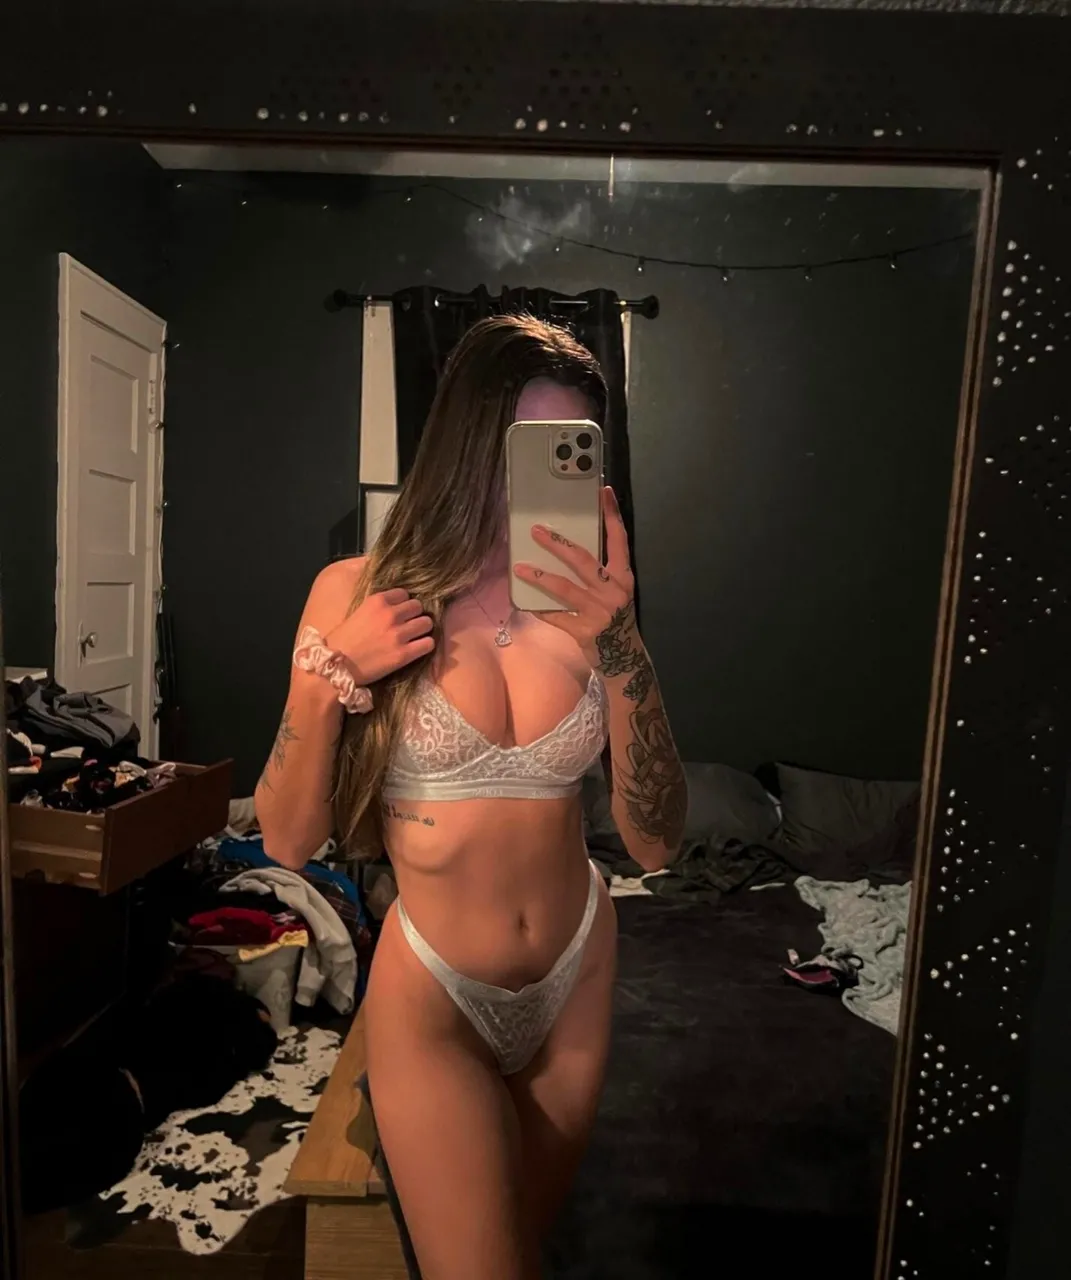 Escorts Jersey City, New Jersey iM NEW JUICY, HOT🔥CREAMY 💦SEXY AND AVAILABLE TO SATISFY 🍆YOU COMPLETELY👅